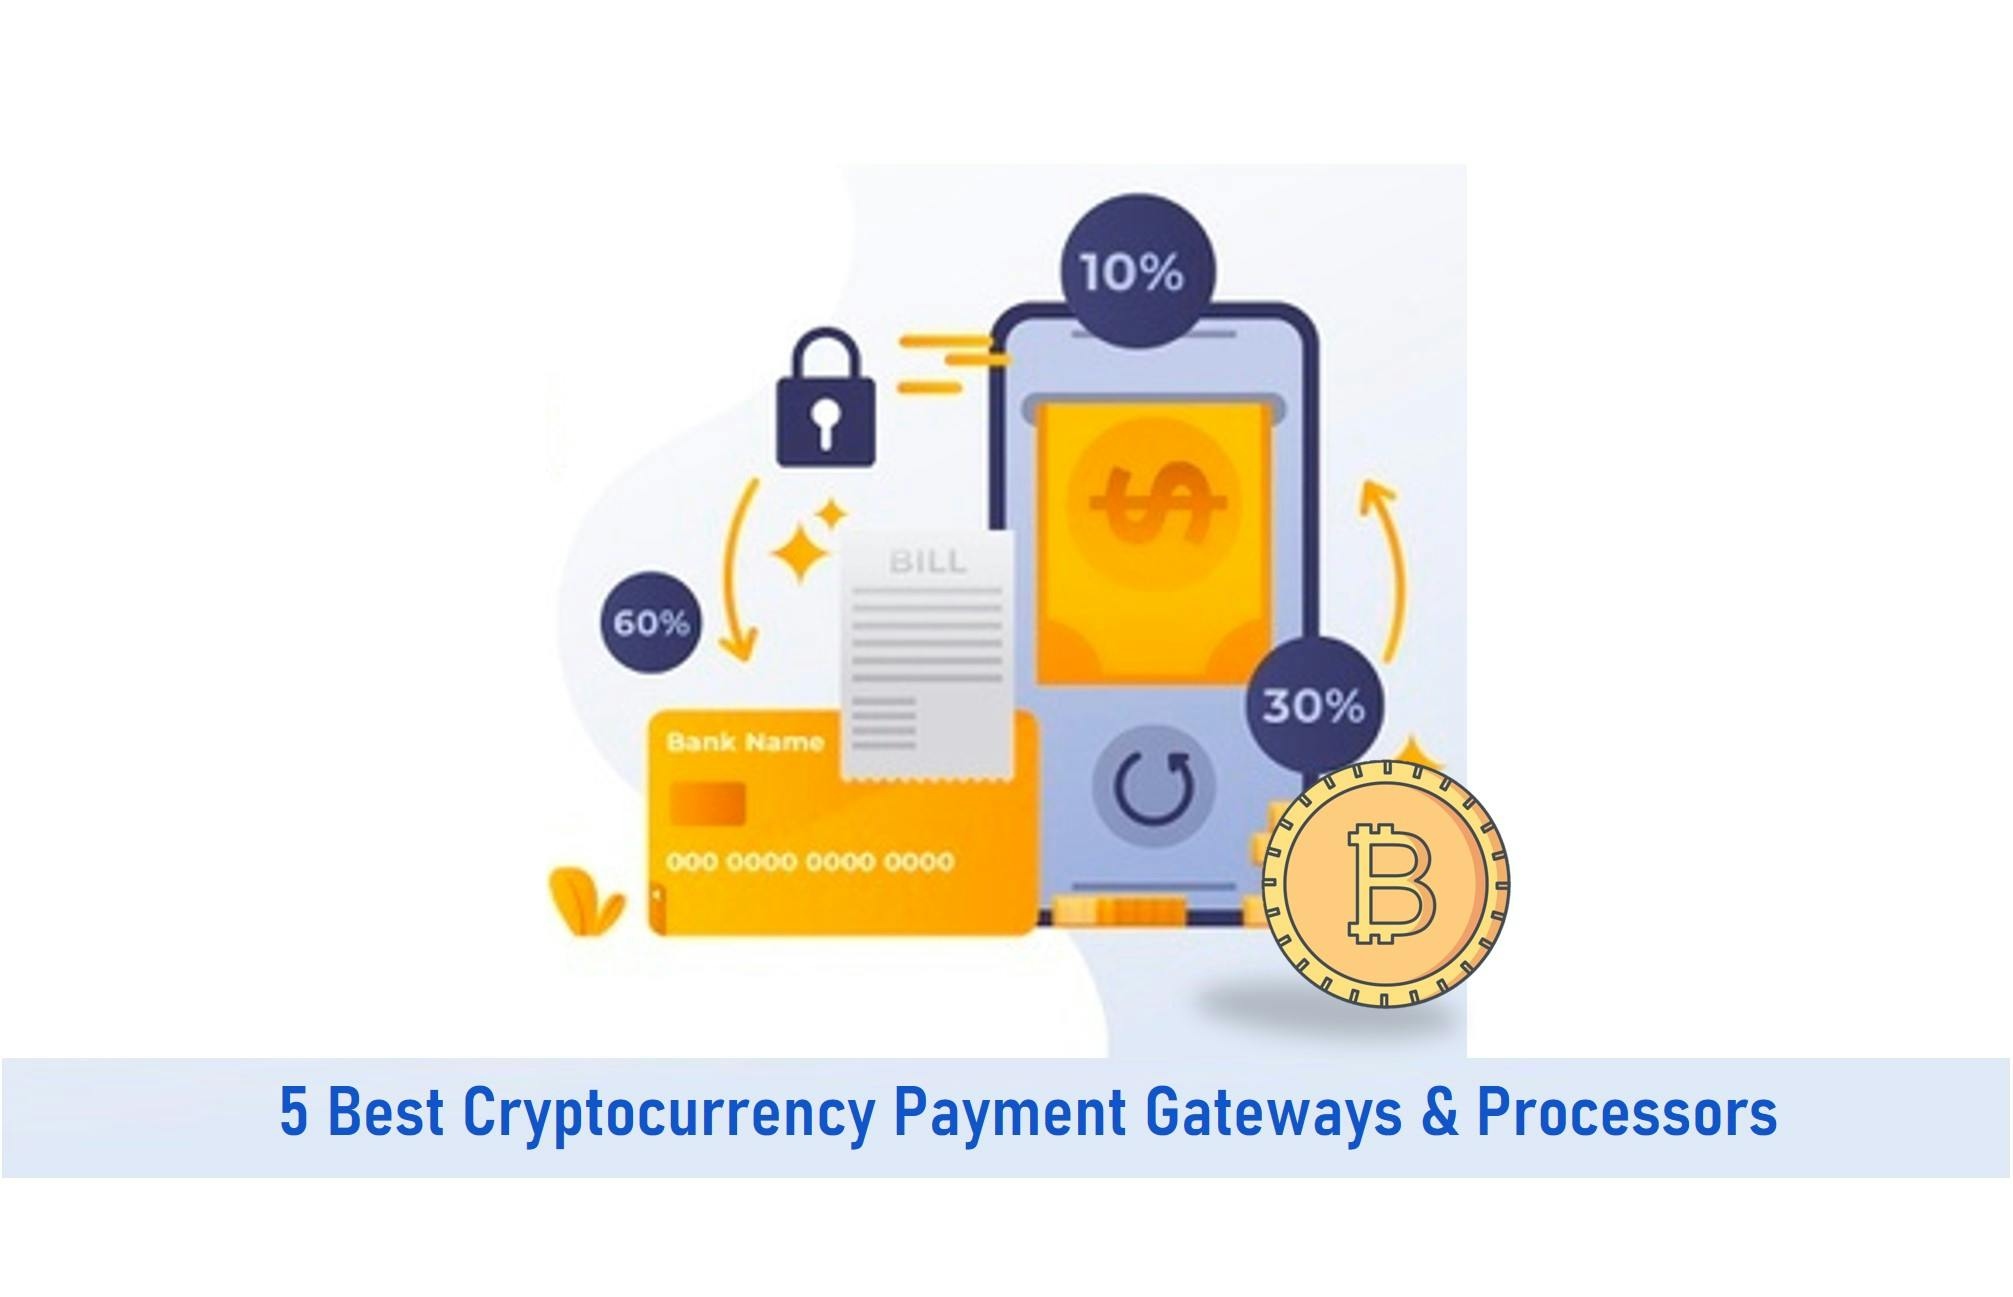 5 Best Cryptocurrency Payment Gateways & Processors